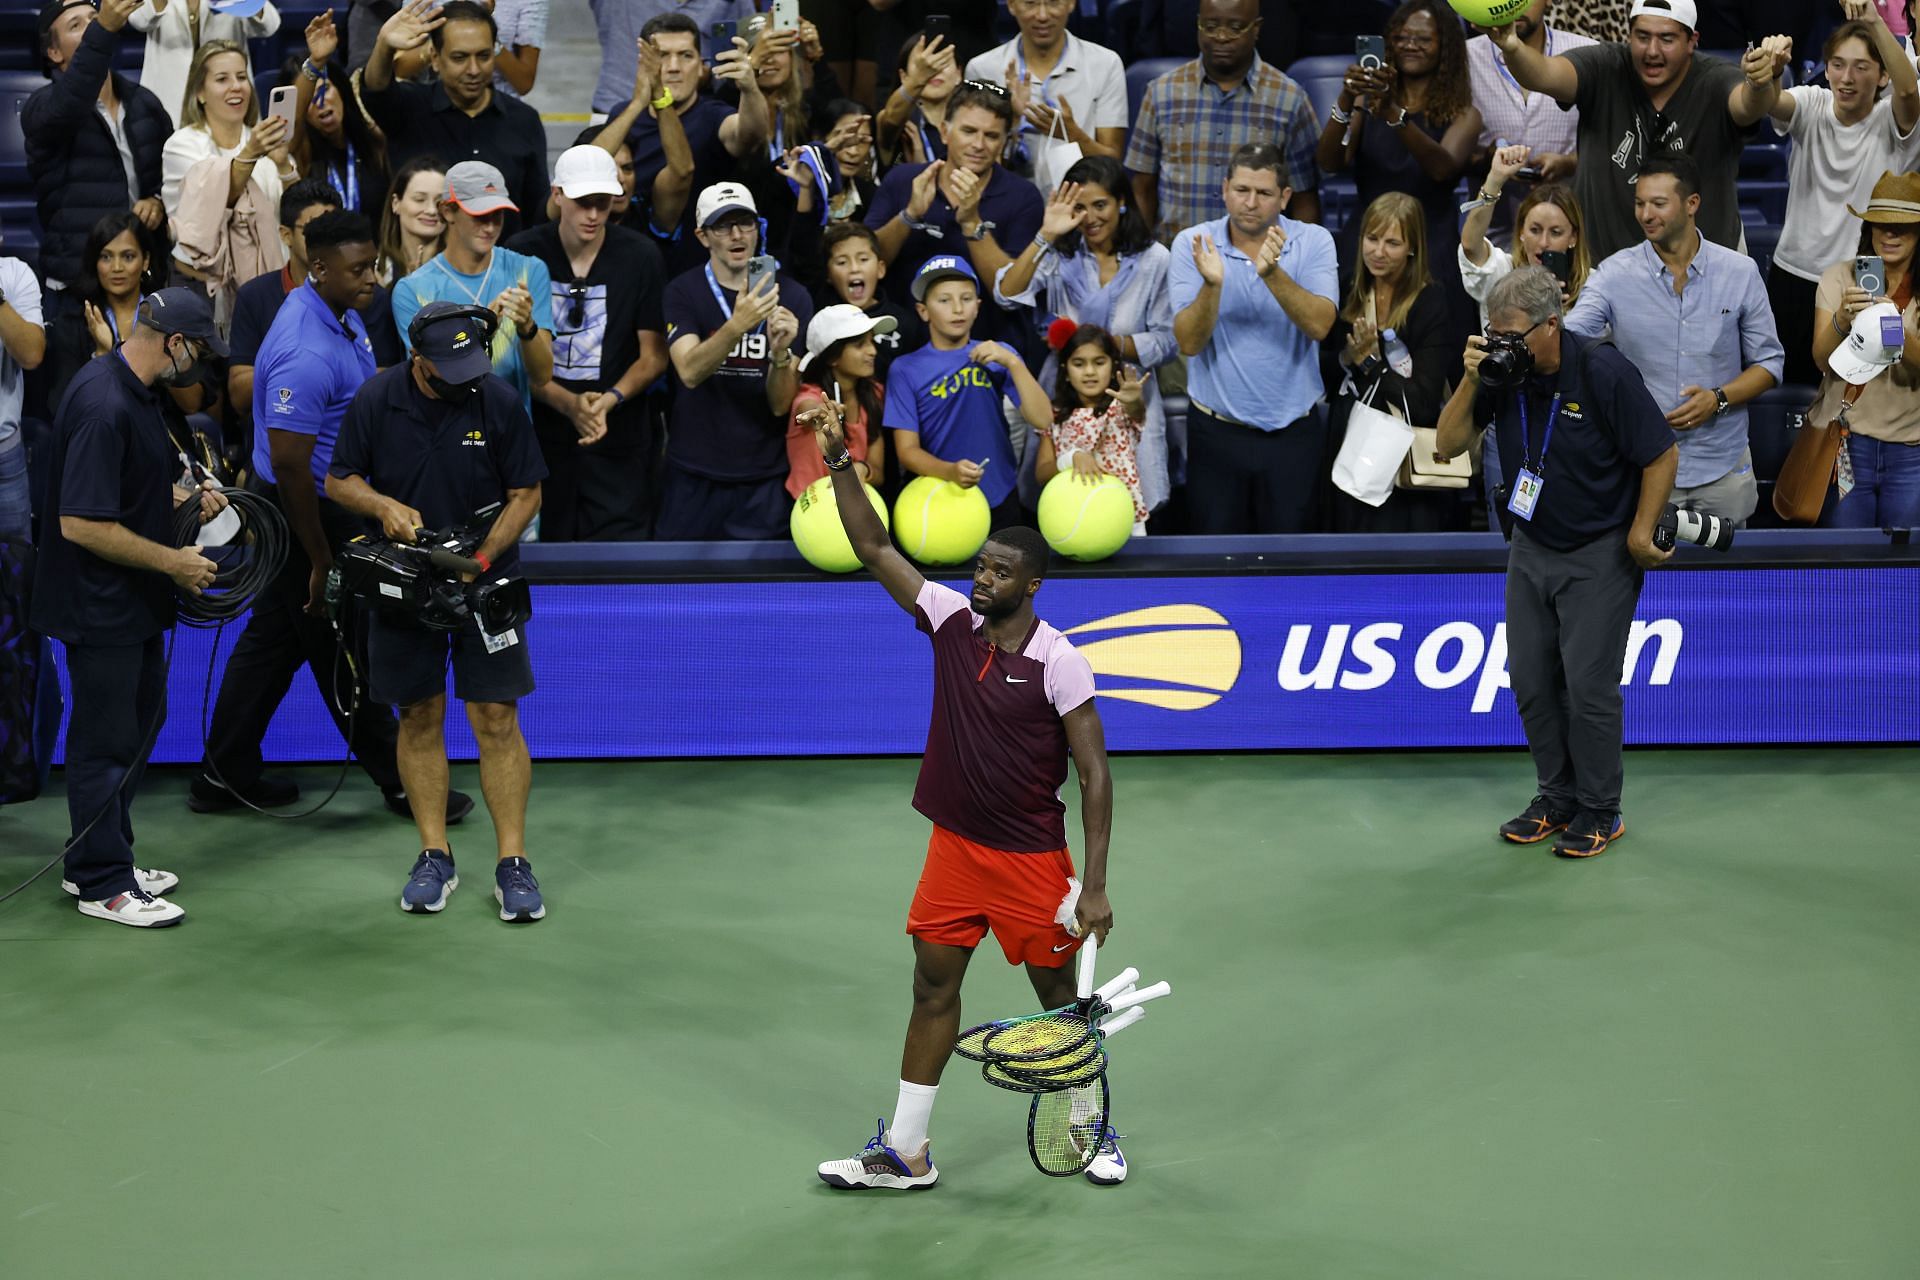 Frances Tiafoe waves to the crowd after his loss against Carlos Alcaraz at the 2022 US Open 